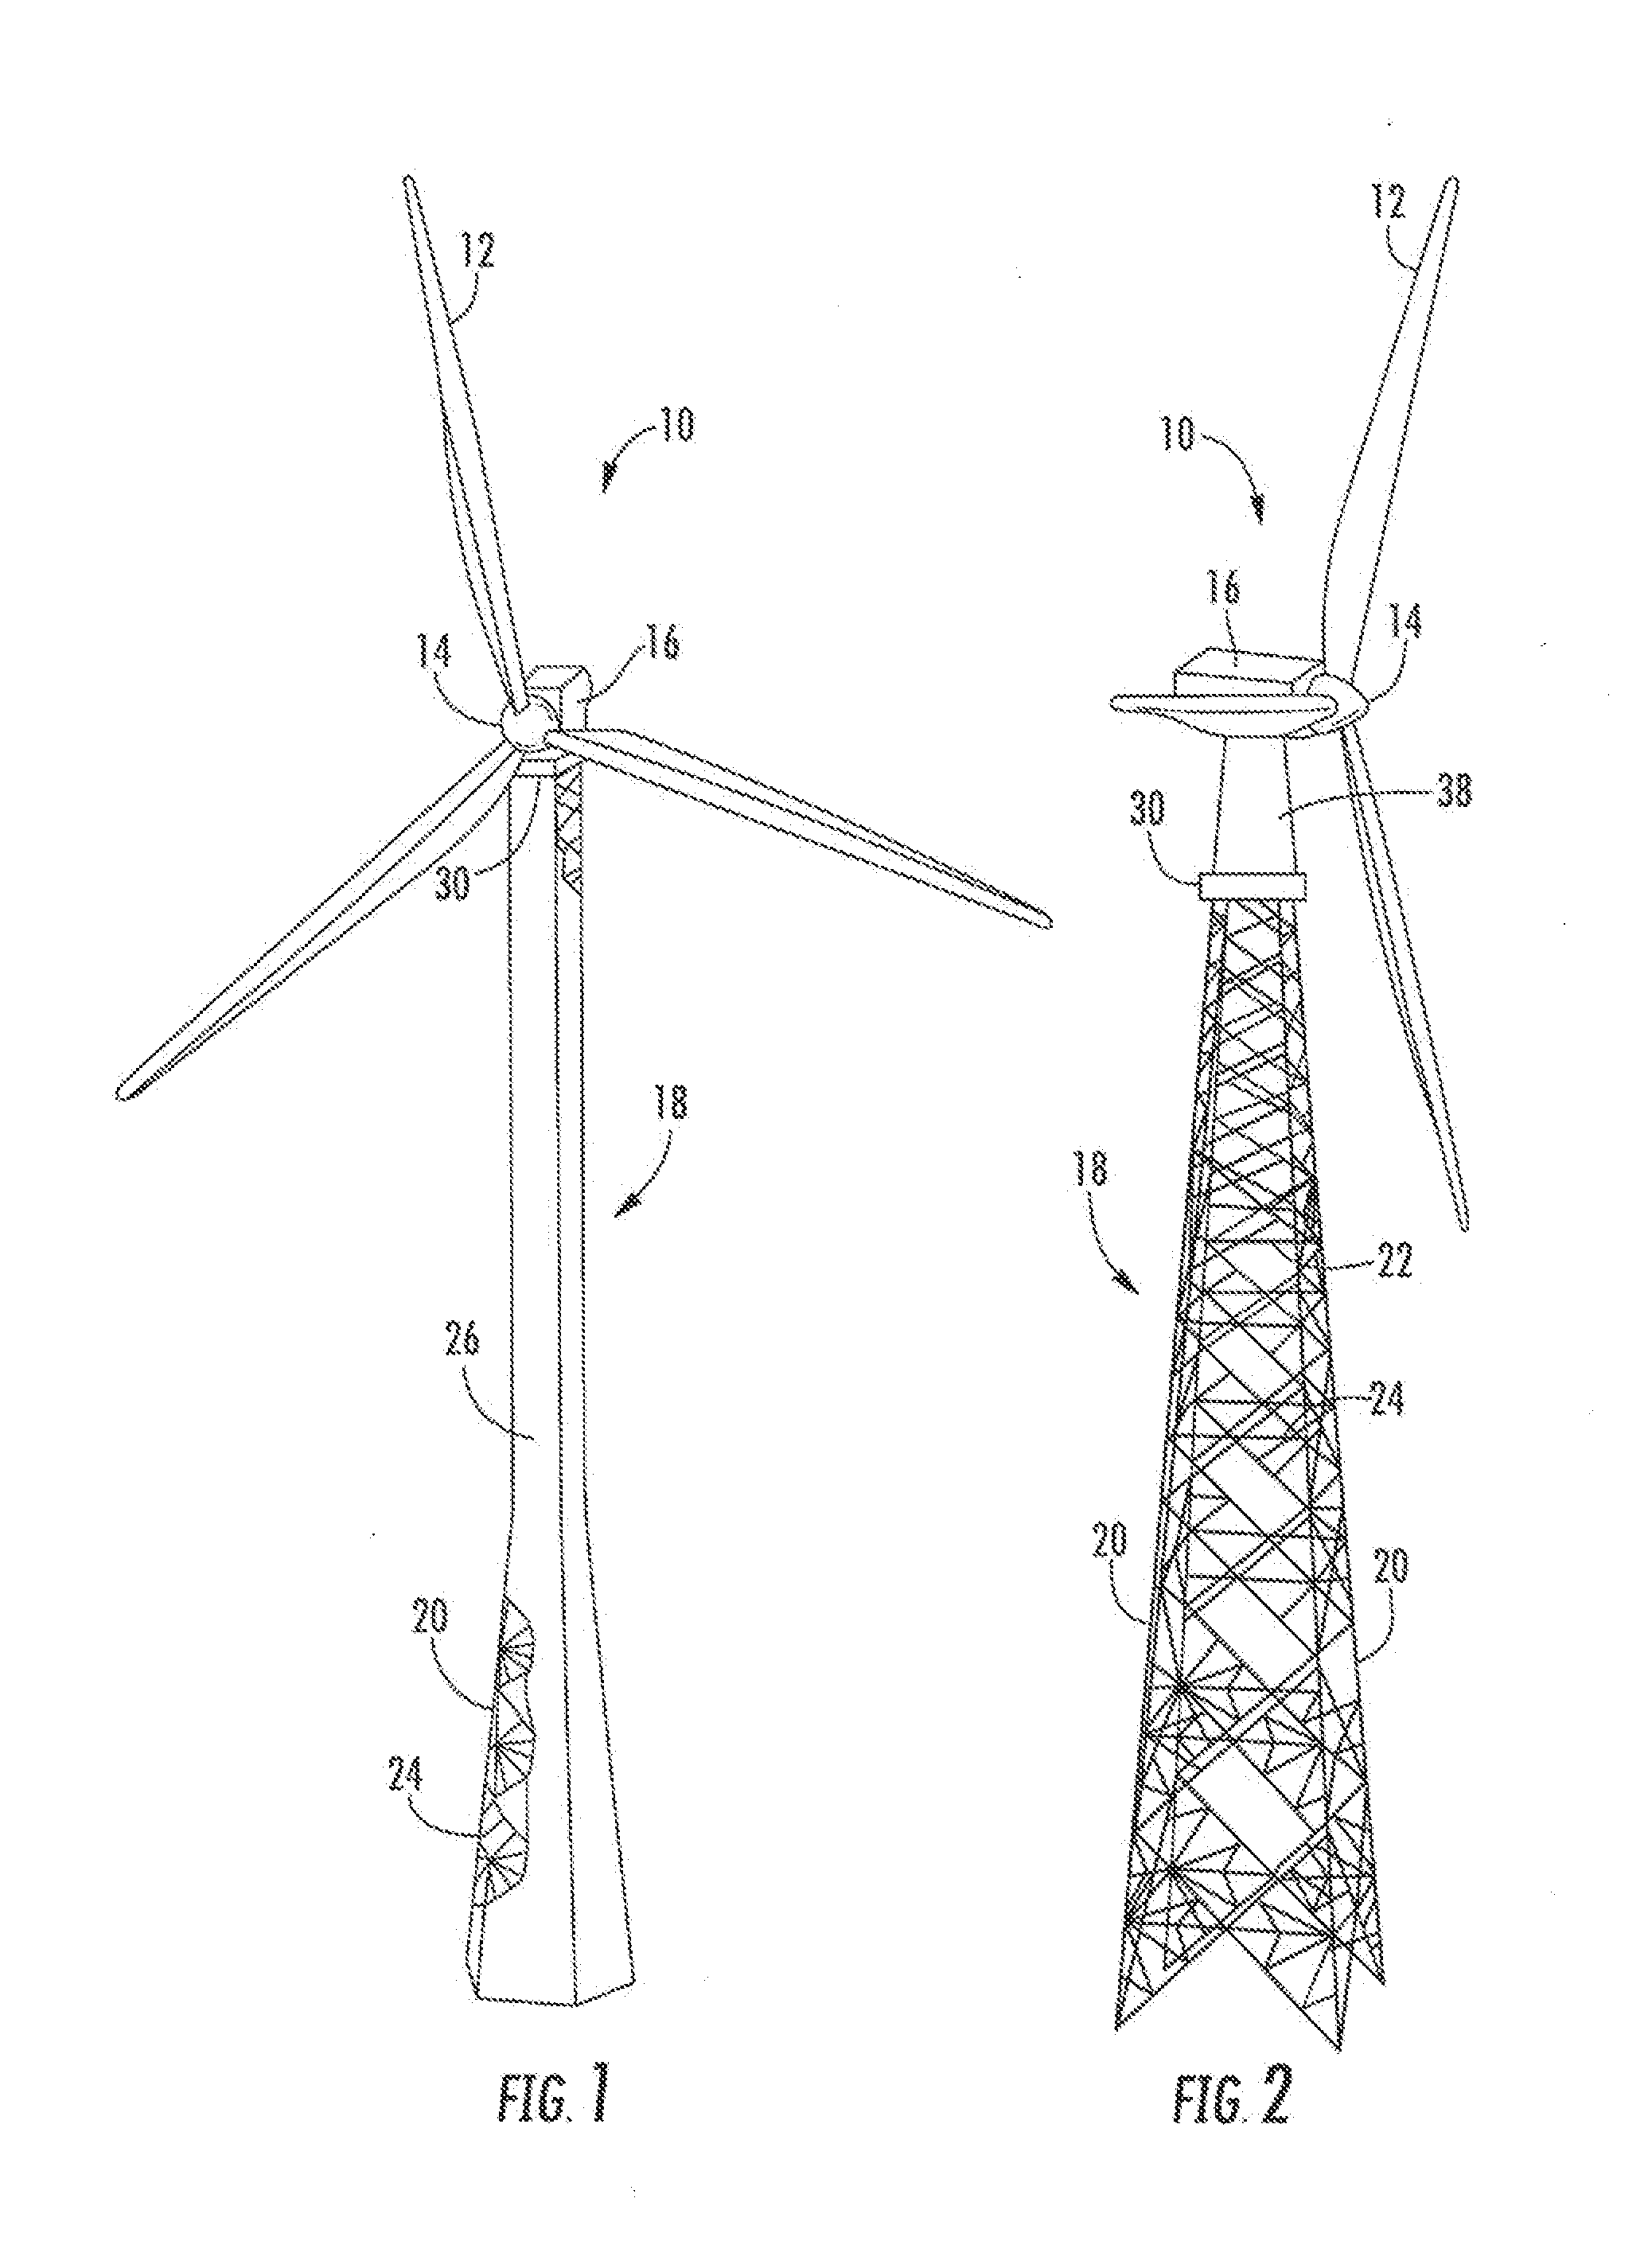 Adapter Configuration for a Wind Tower Lattice Structure